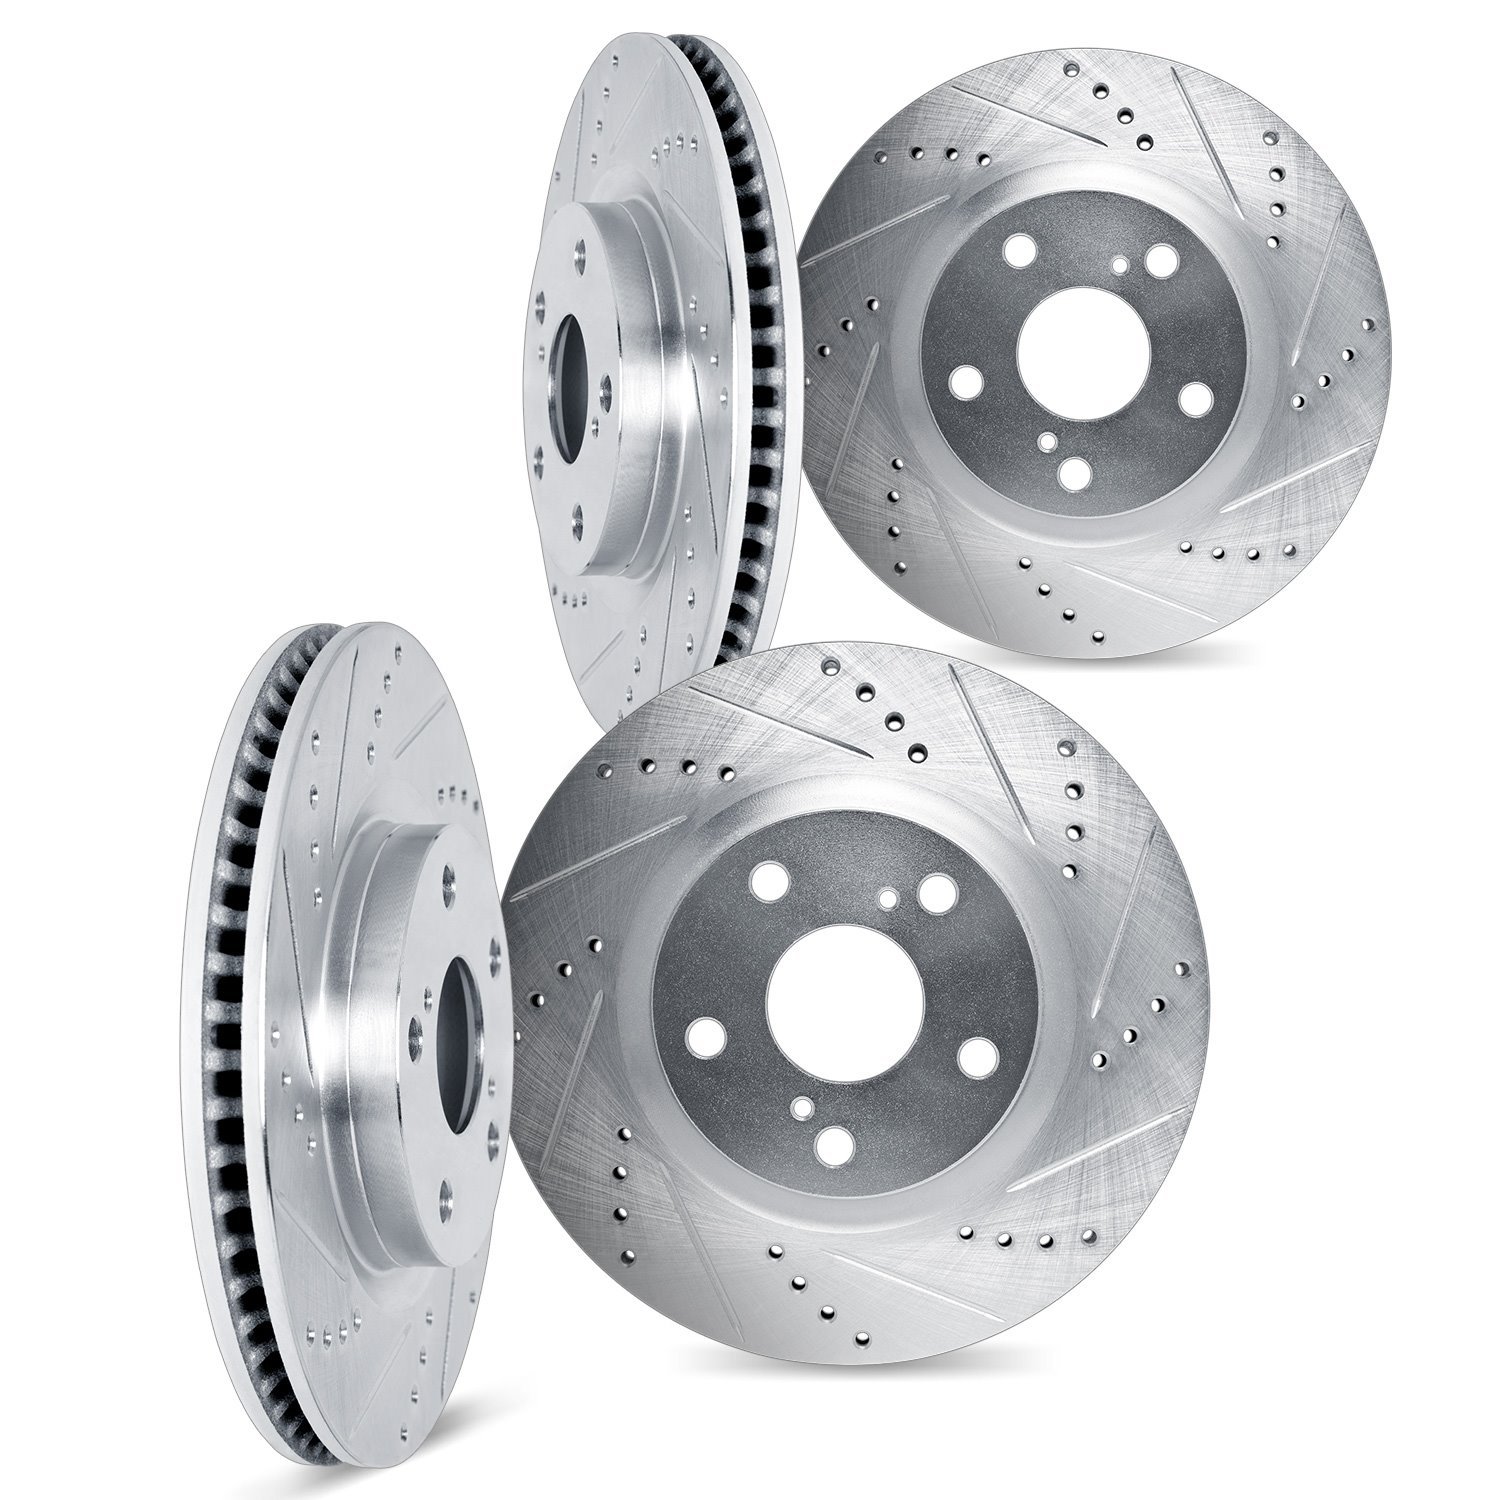 7004-31048 Drilled/Slotted Brake Rotors [Silver], Fits Select BMW, Position: Front and Rear